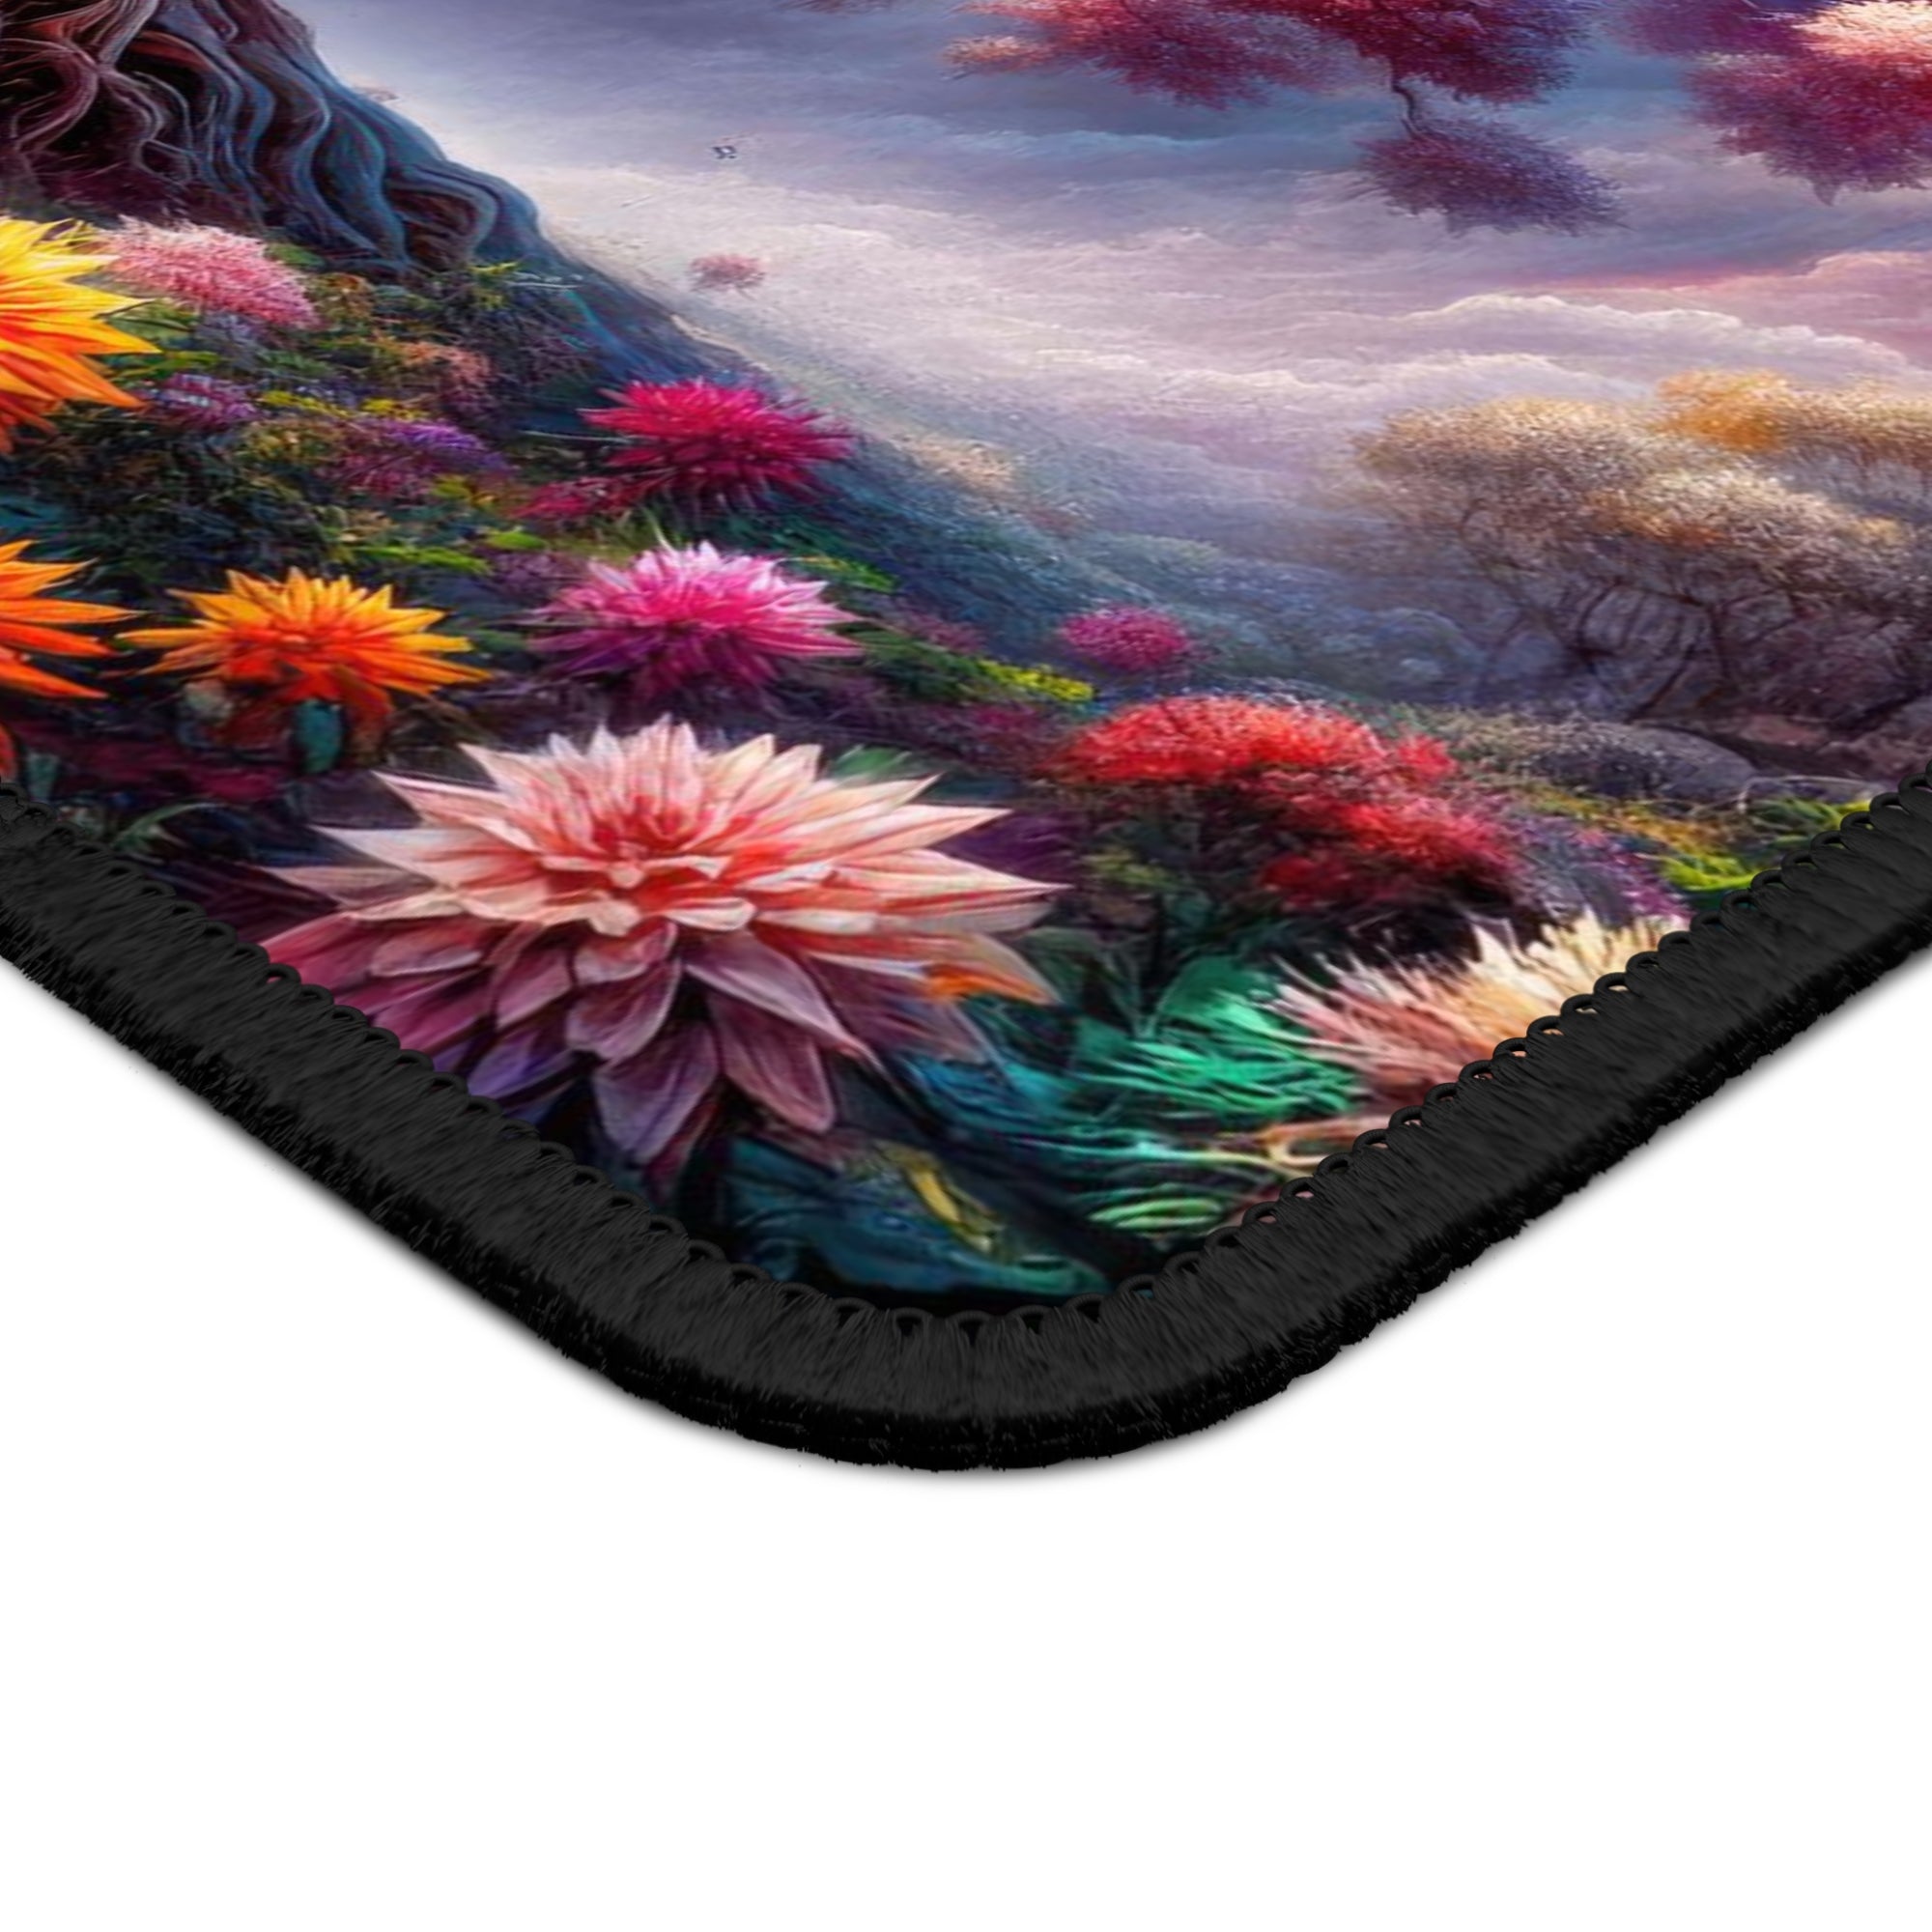 The Tree of Hues Gaming Mouse Pad